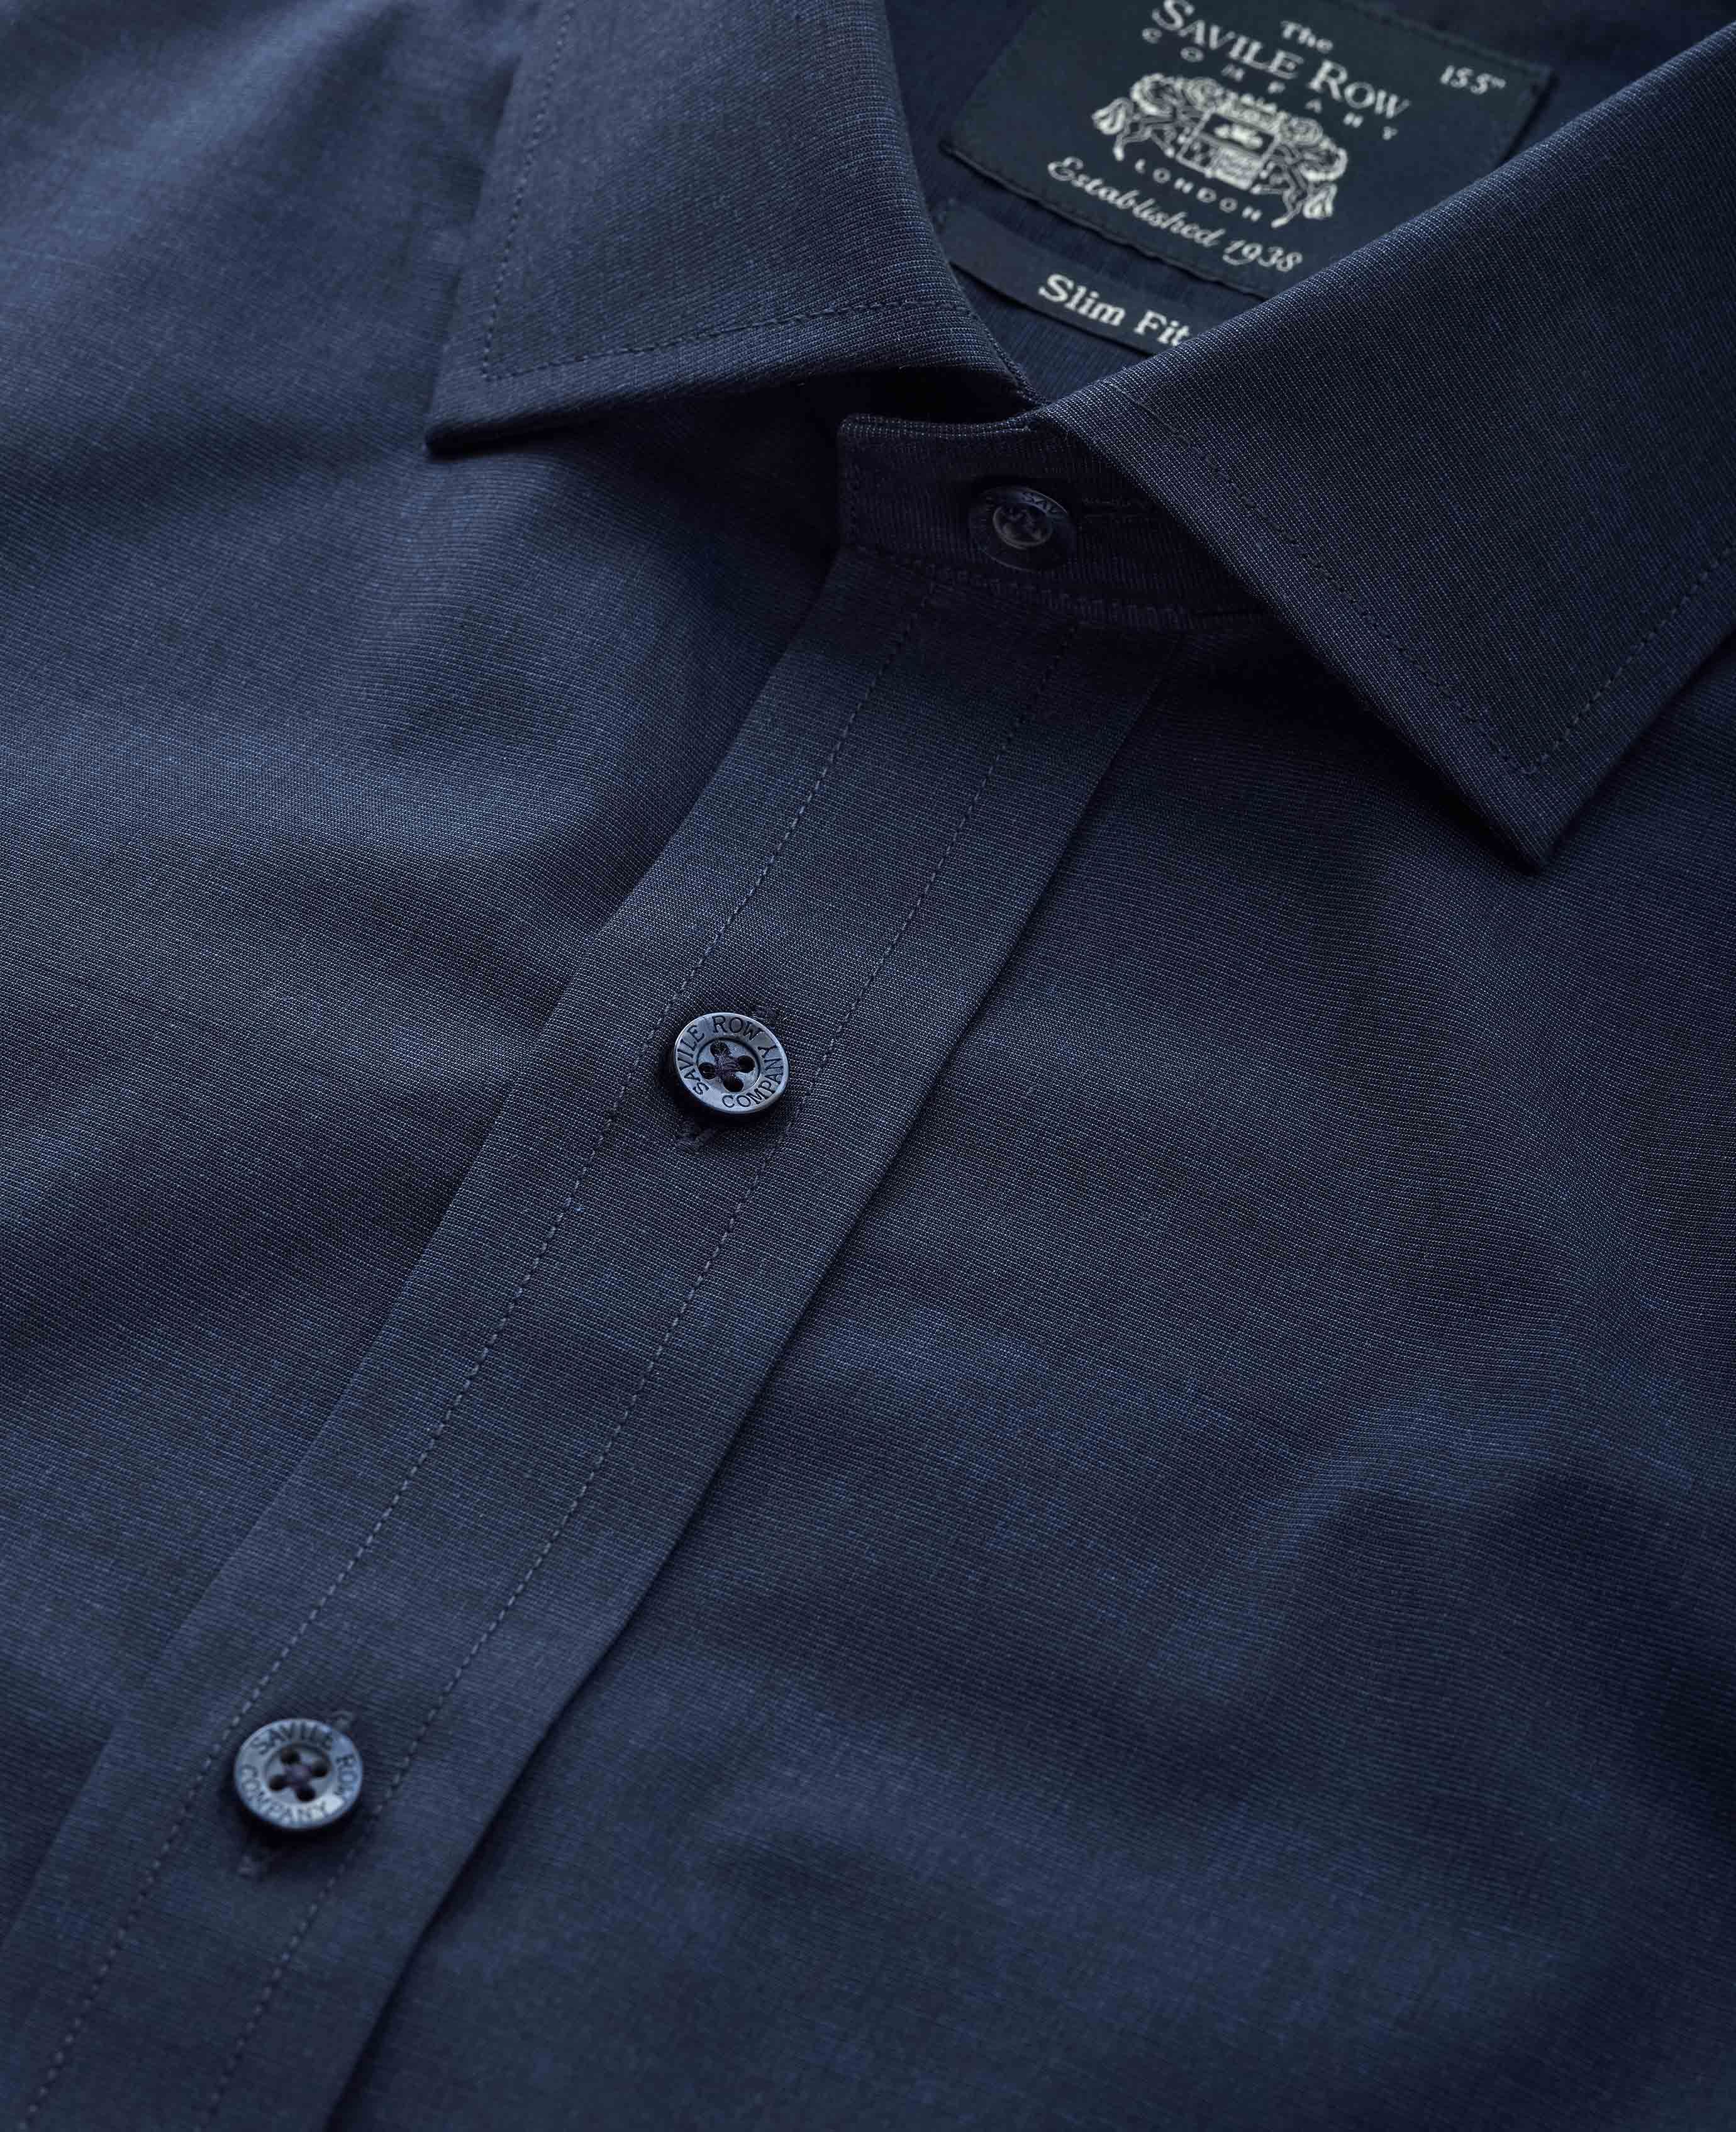 Men's Dyed Navy EoE Slim Fit Formal Shirt With Single Cuffs | Savile Row Co